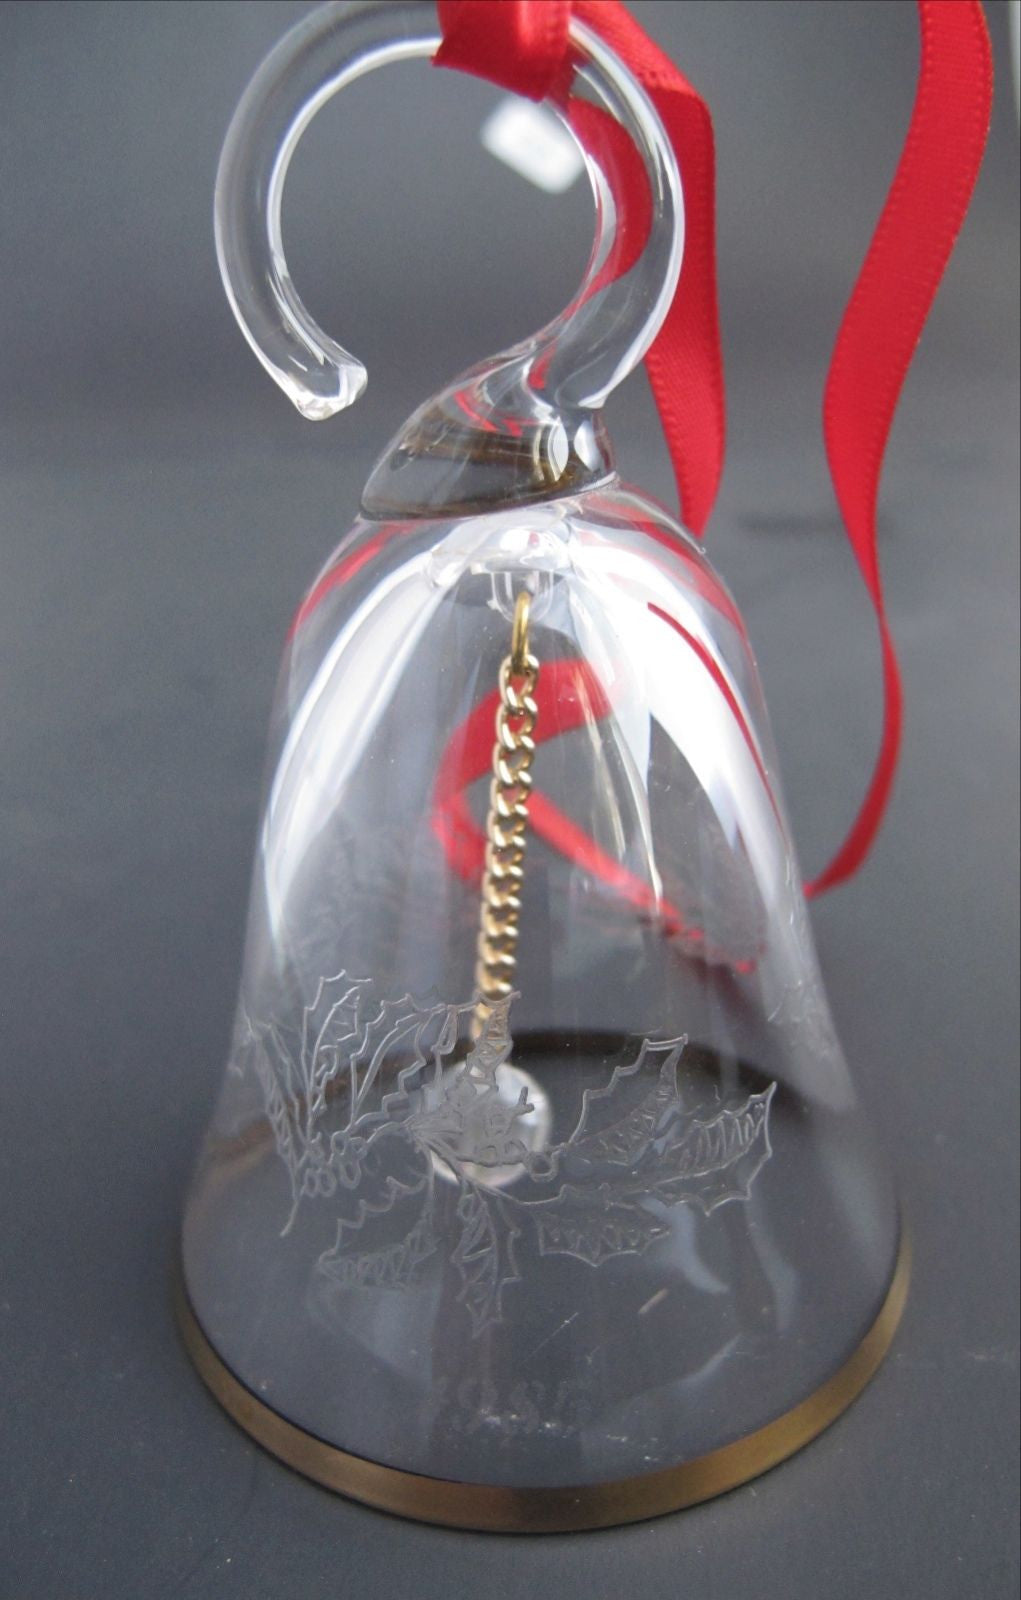 Lenox Crystal 1985 Holly  miniature bell ornament Hand blown Made in USA - O'Rourke crystal awards & gifts abp cut glass